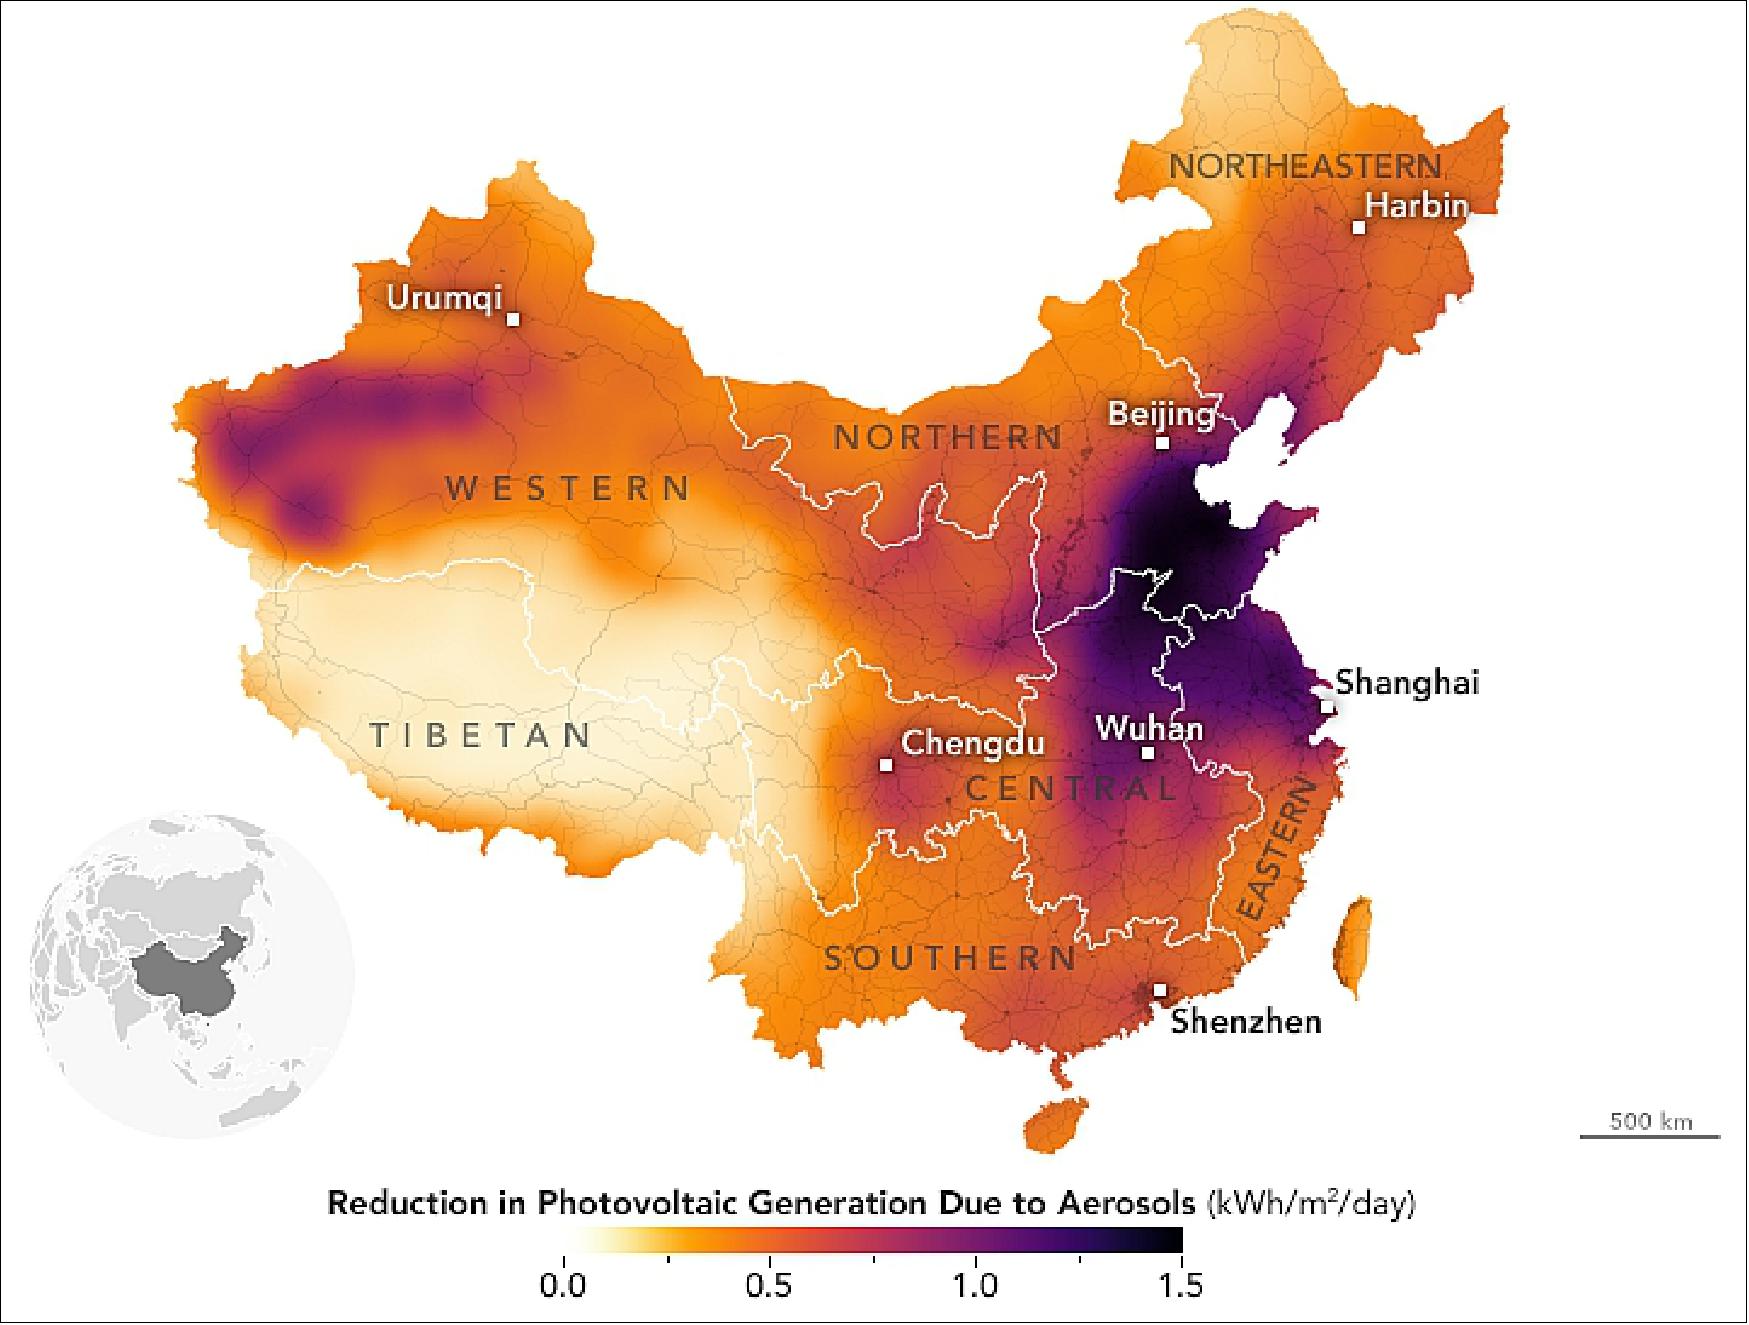 Figure 69: Study of the reduction in photovoltaic generation in China due to aerosols as observed by CERES on NASA's Aqua satellite in the period 2003-2014 (image credit: NASA Earth Observatory image by Joshua Stevens, using data from Li, Xiaoyuan, et al. (2017)